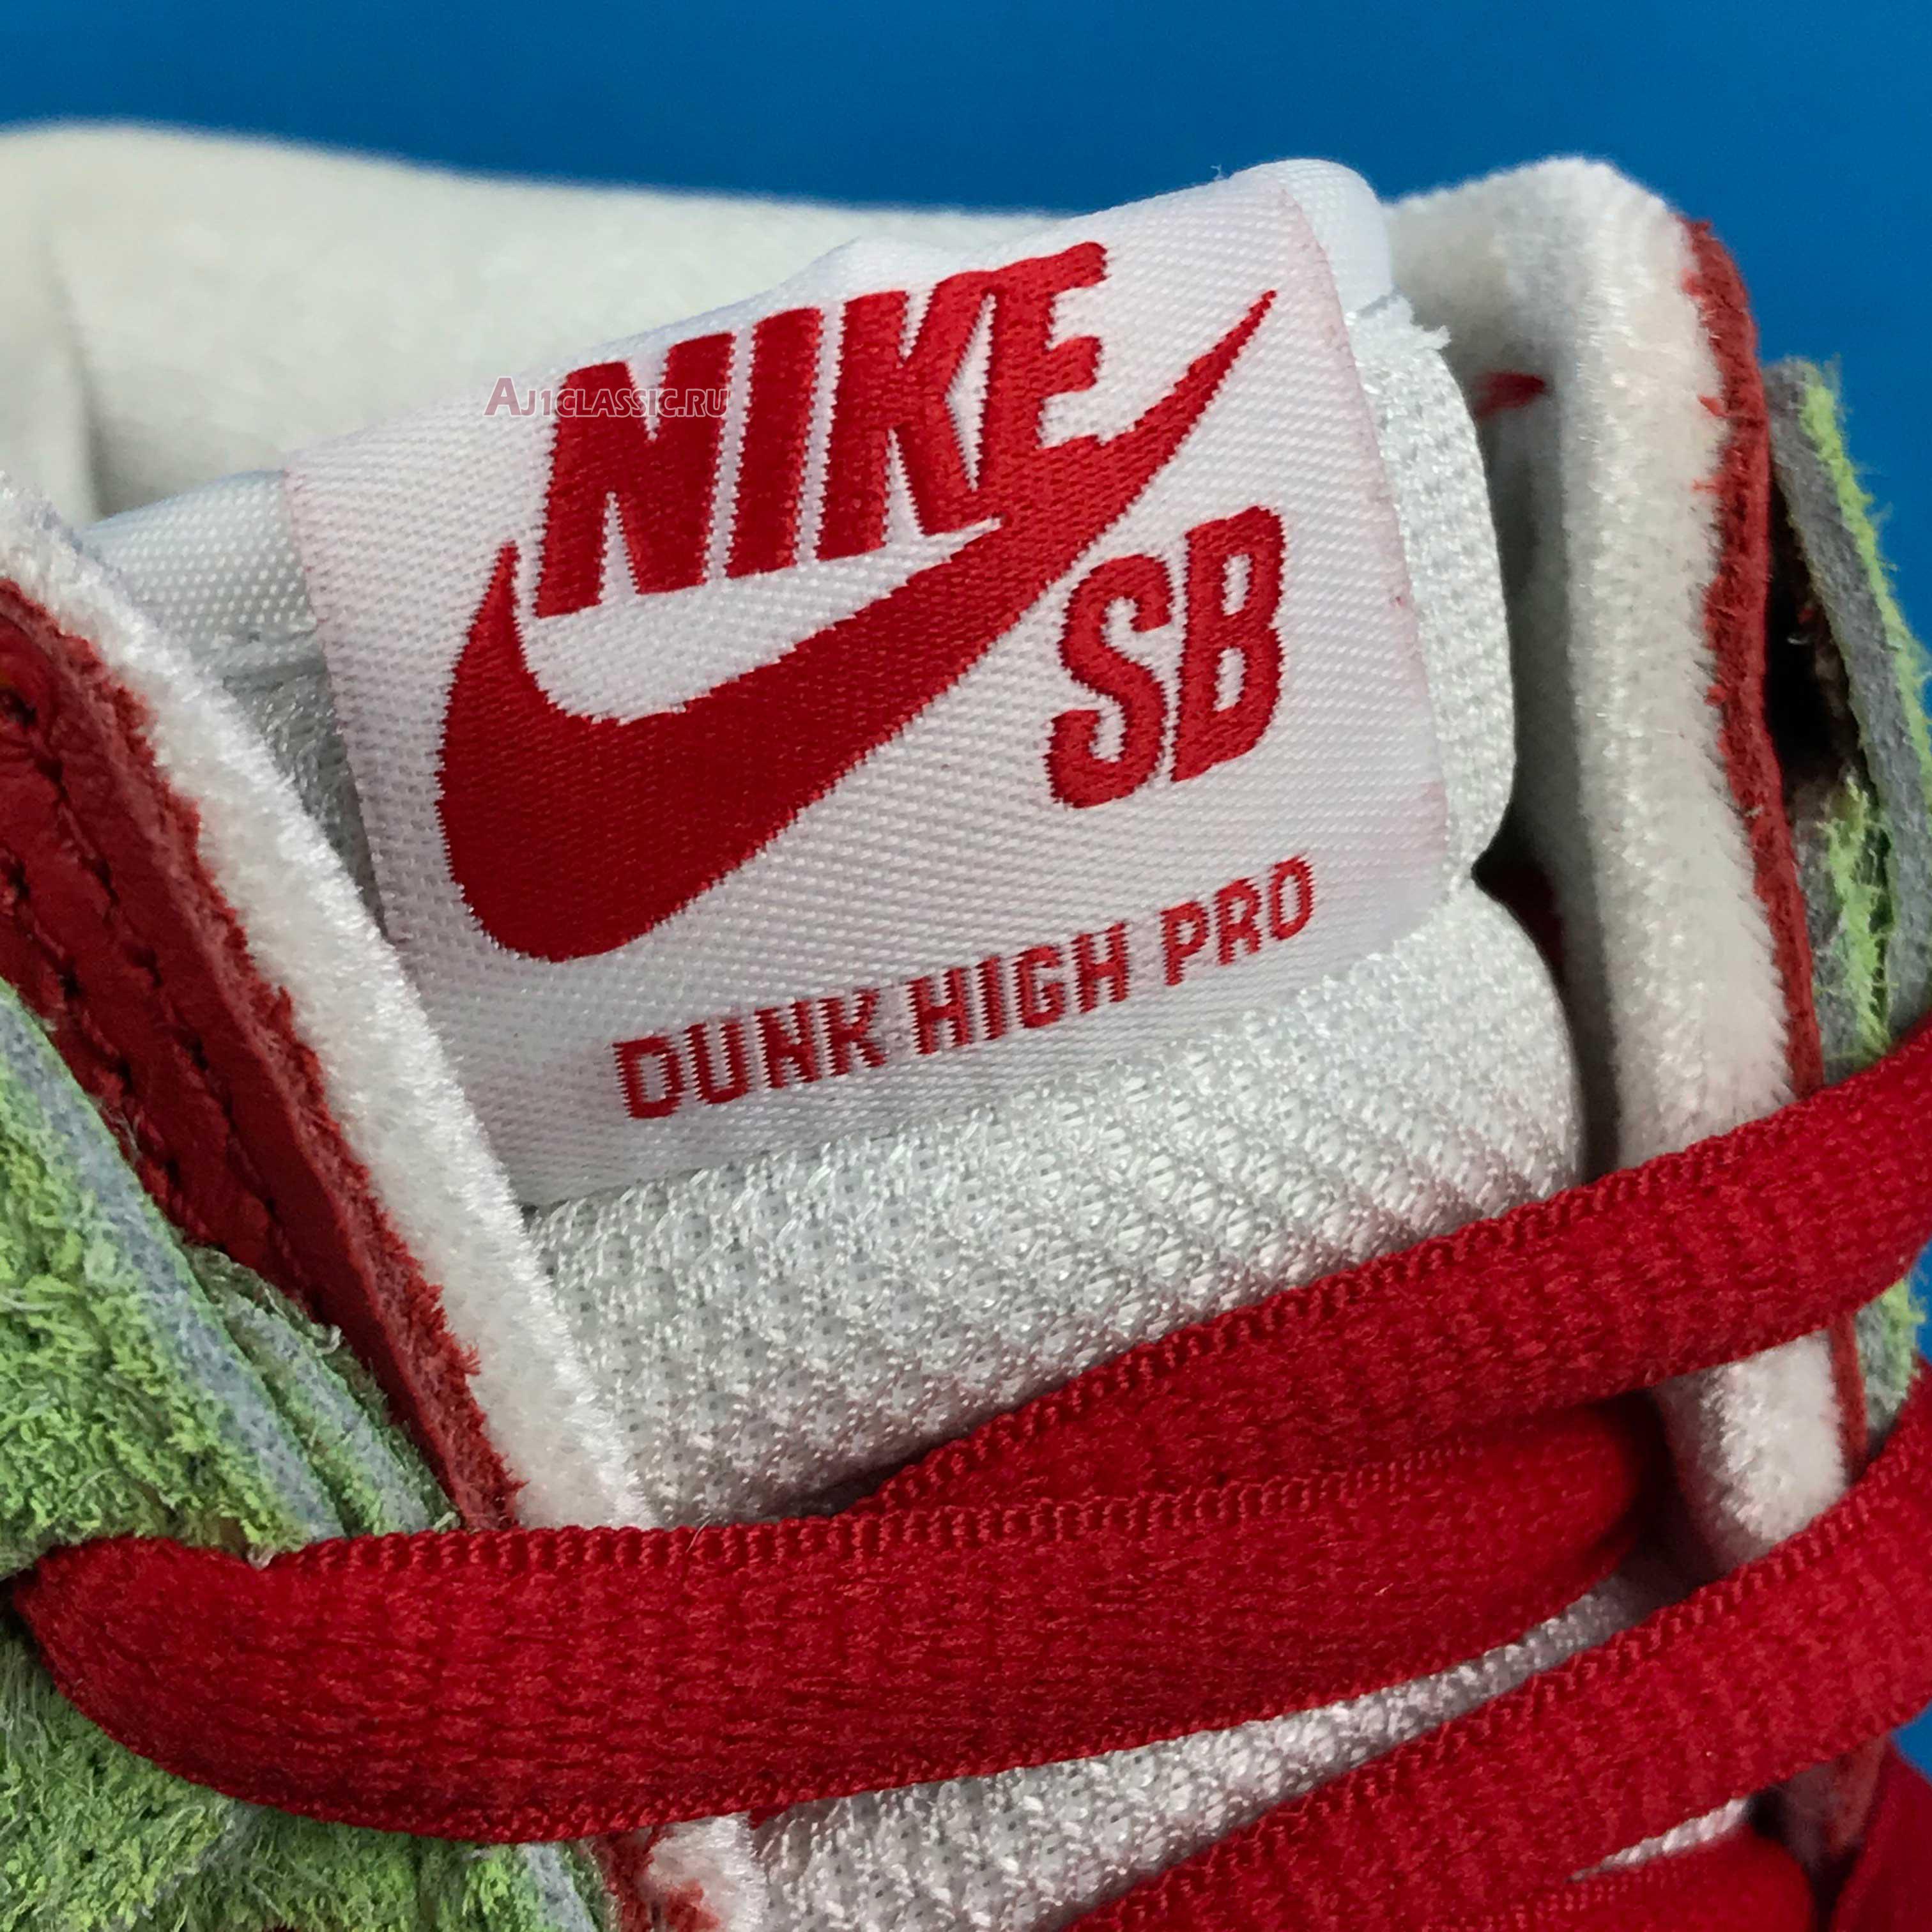 Nike Dunk High SB Strawberry Cough CW7093-600 University Red/Spinach Green/Magic Ember Sneakers